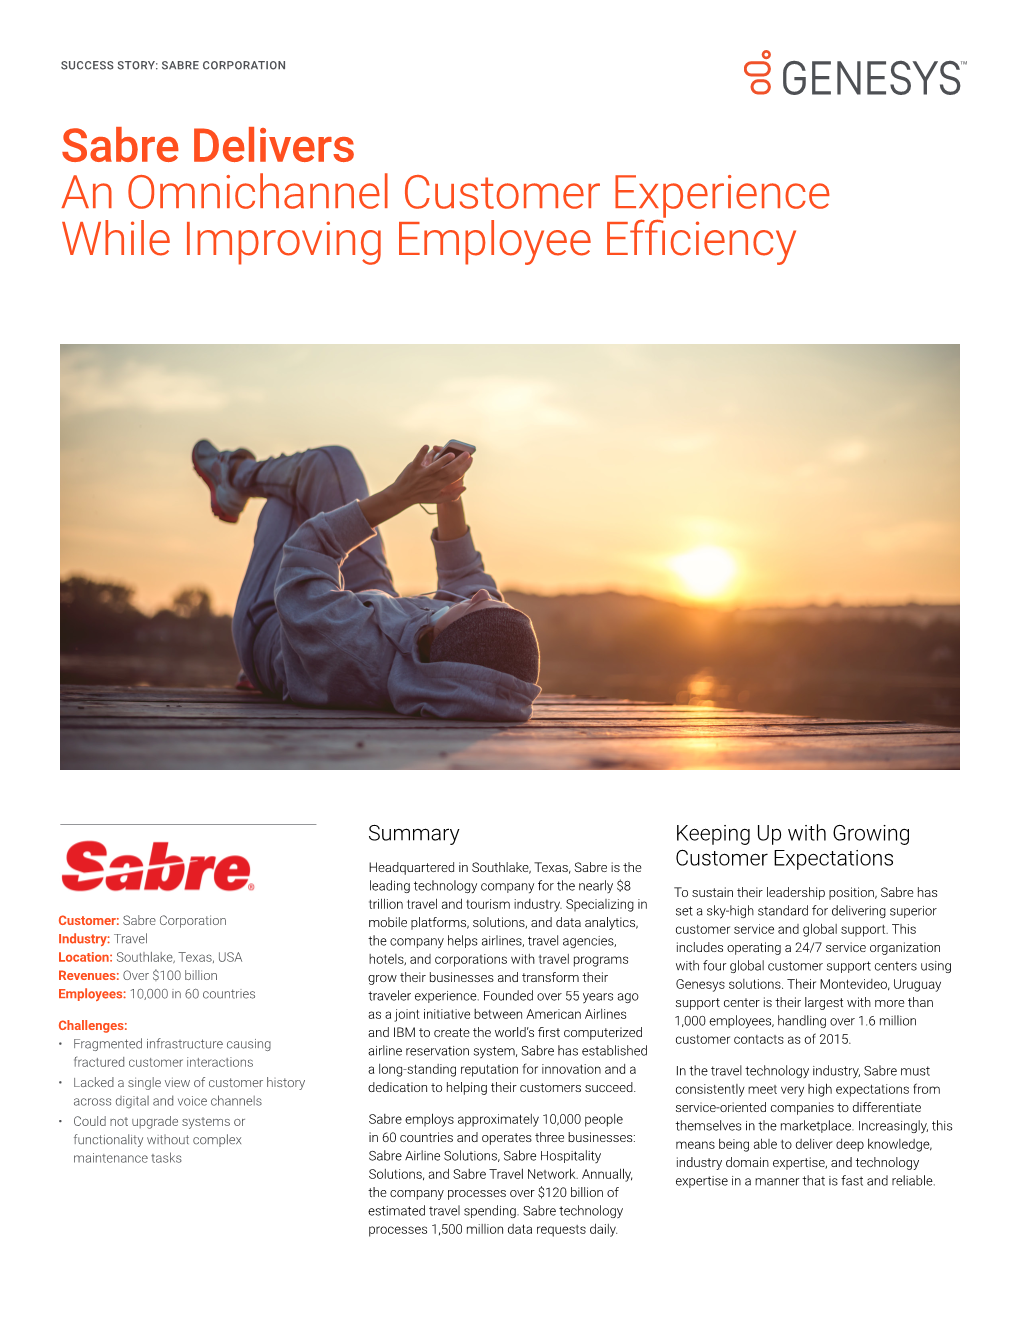 Sabre Delivers an Omnichannel Customer Experience While Improving Employee Efficiency